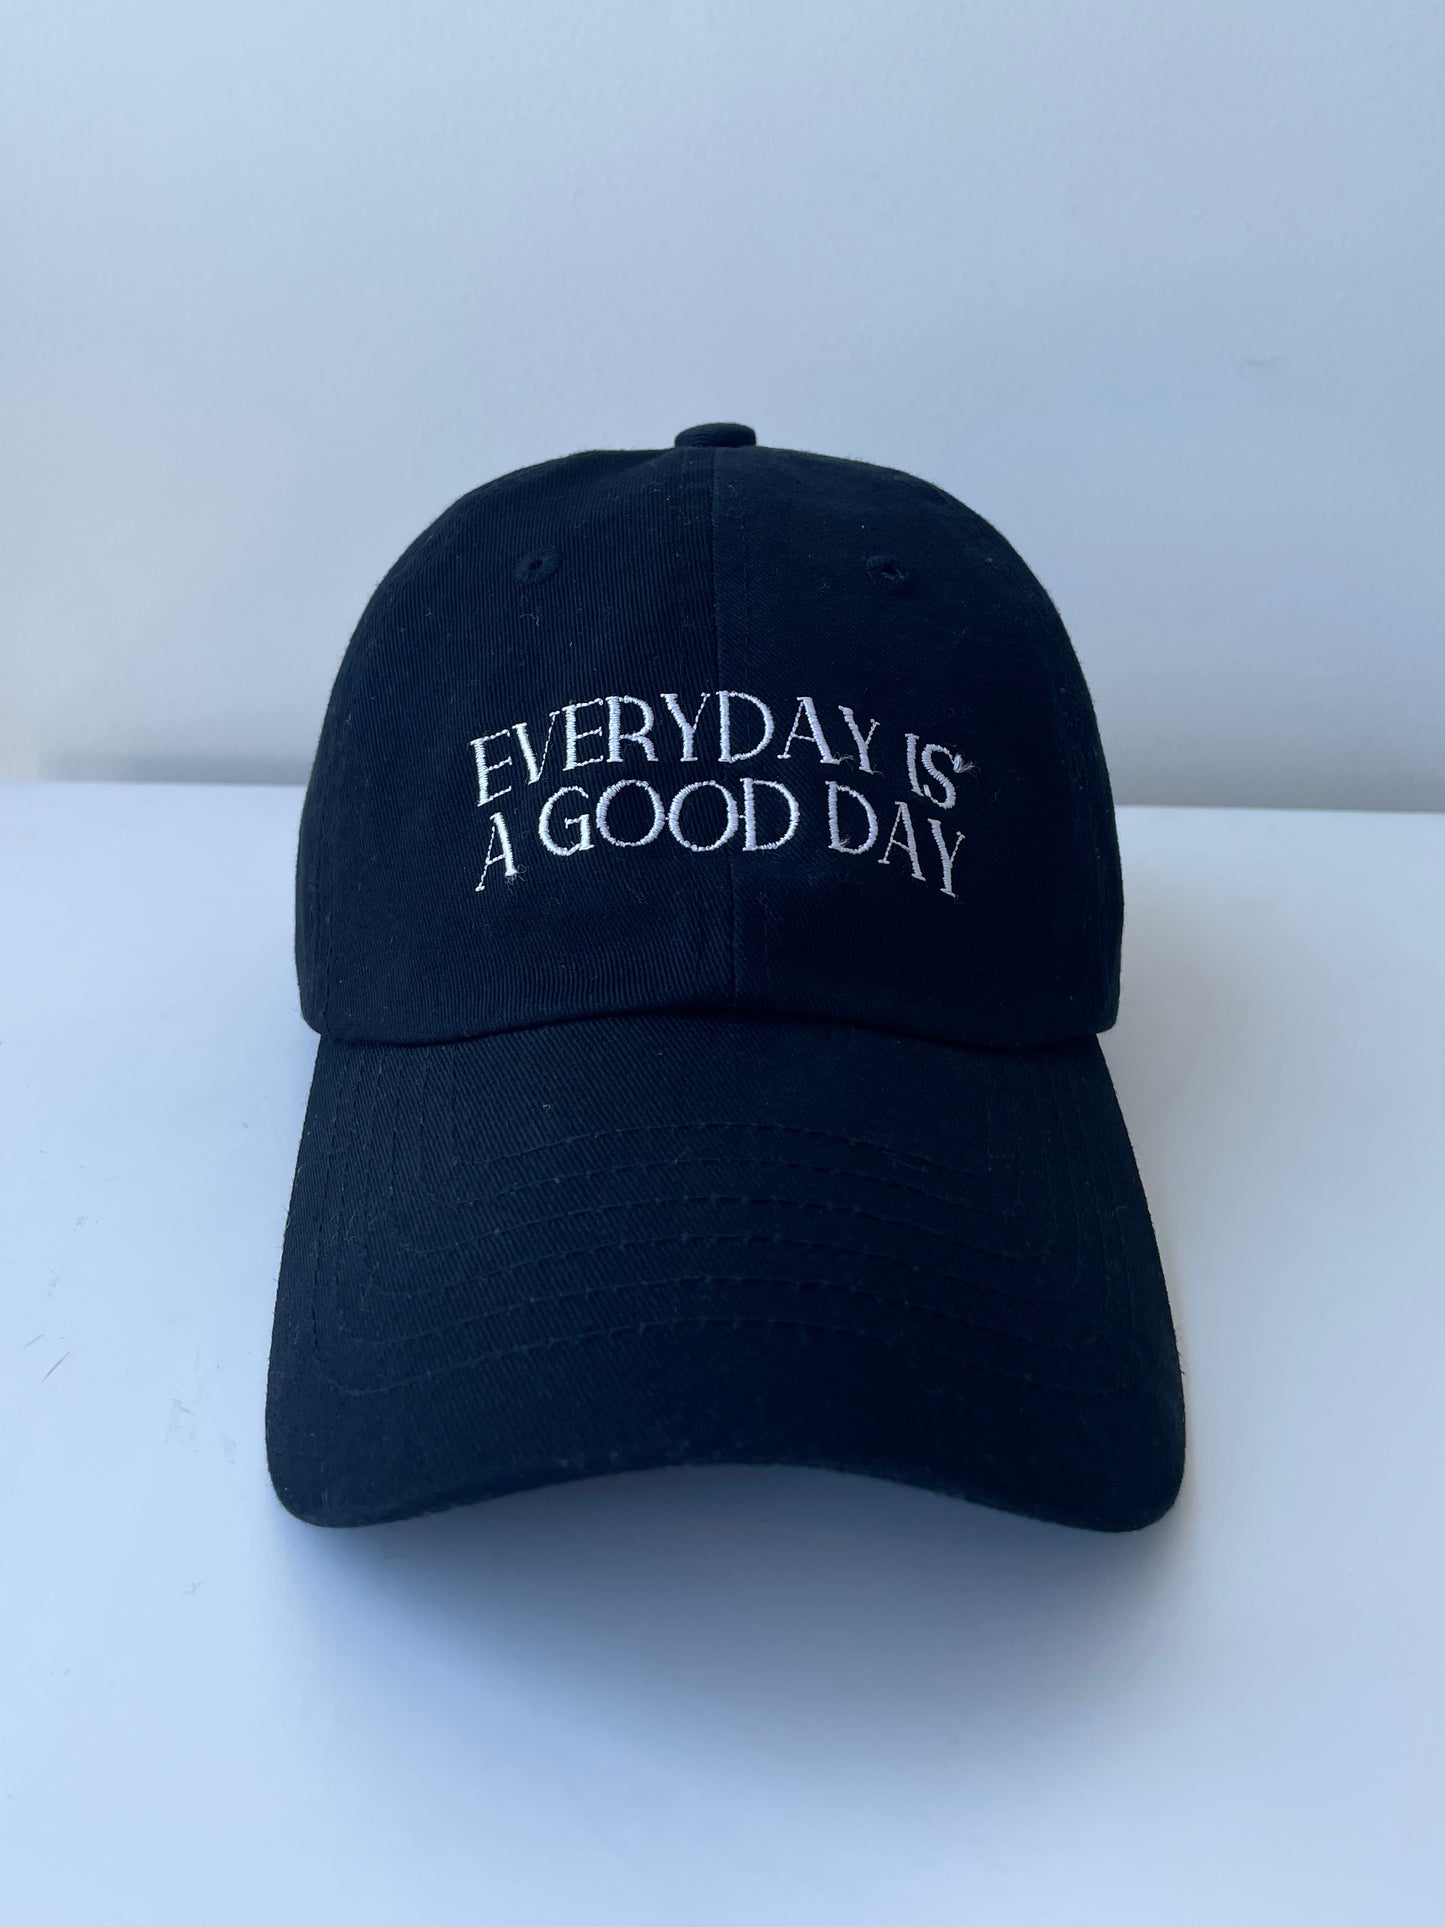 GOOD DAY Embroidery CAP Black